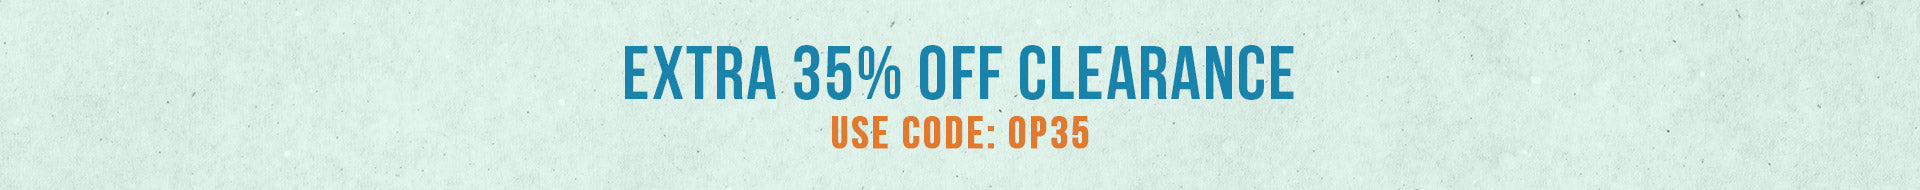 EXTRA 35% OFF CLEARANCE USE CODE: OP35